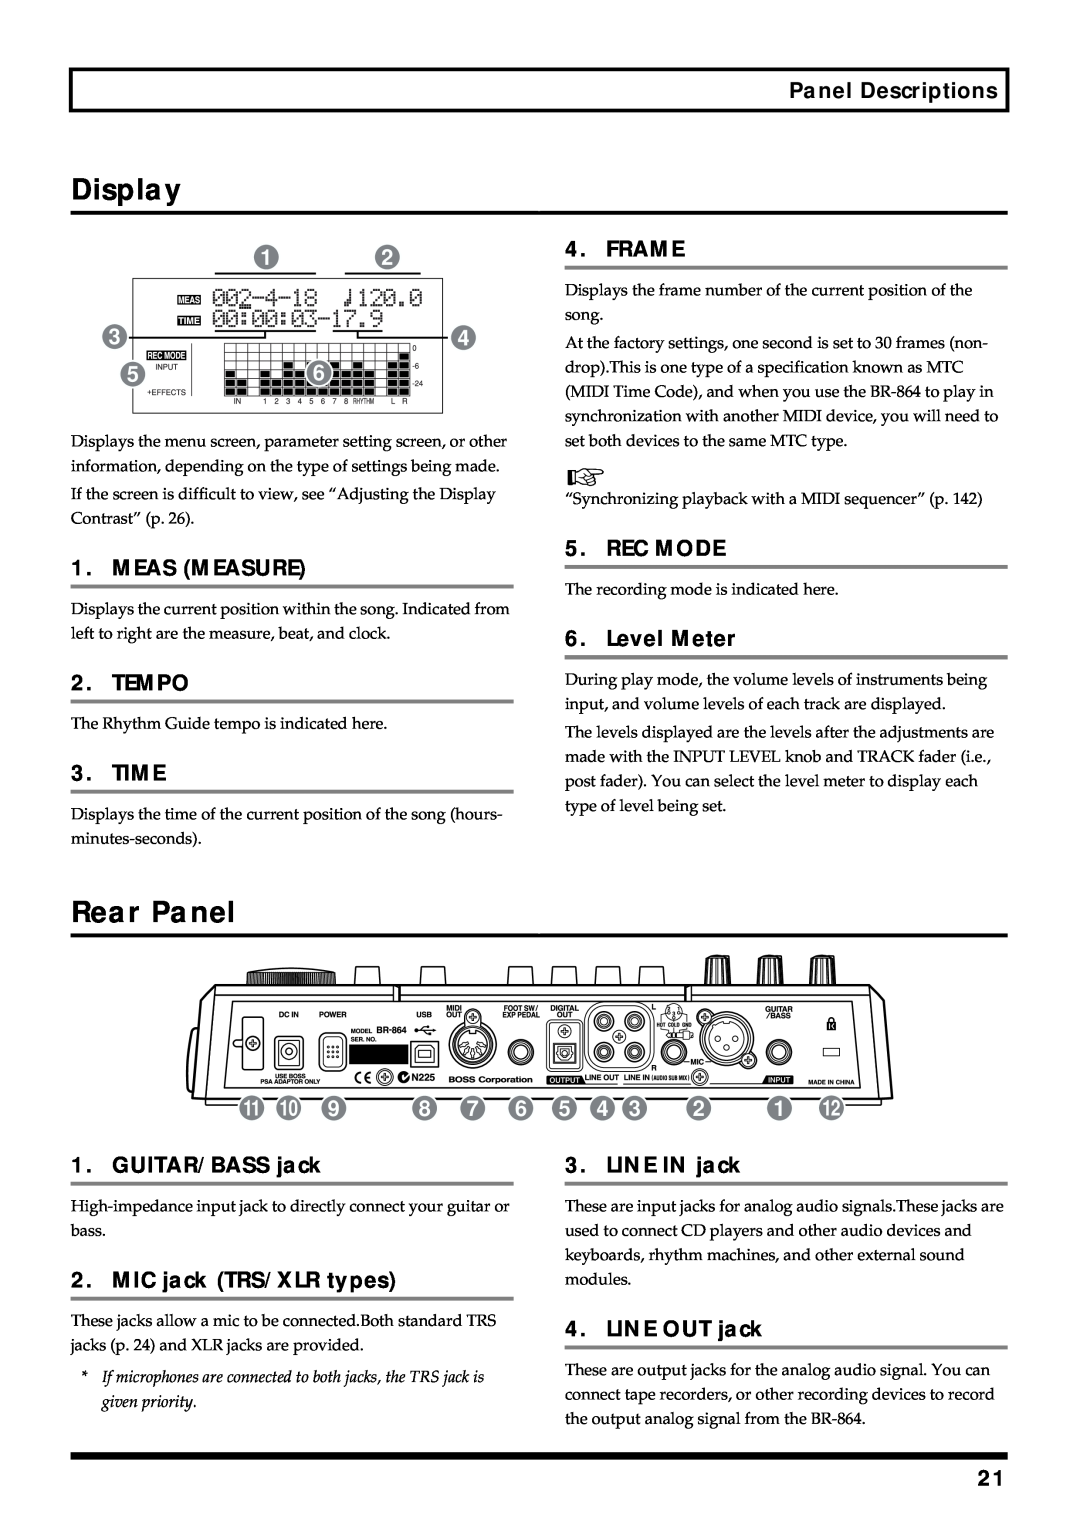 Roland BR-864 owner manual Display, Rear Panel 